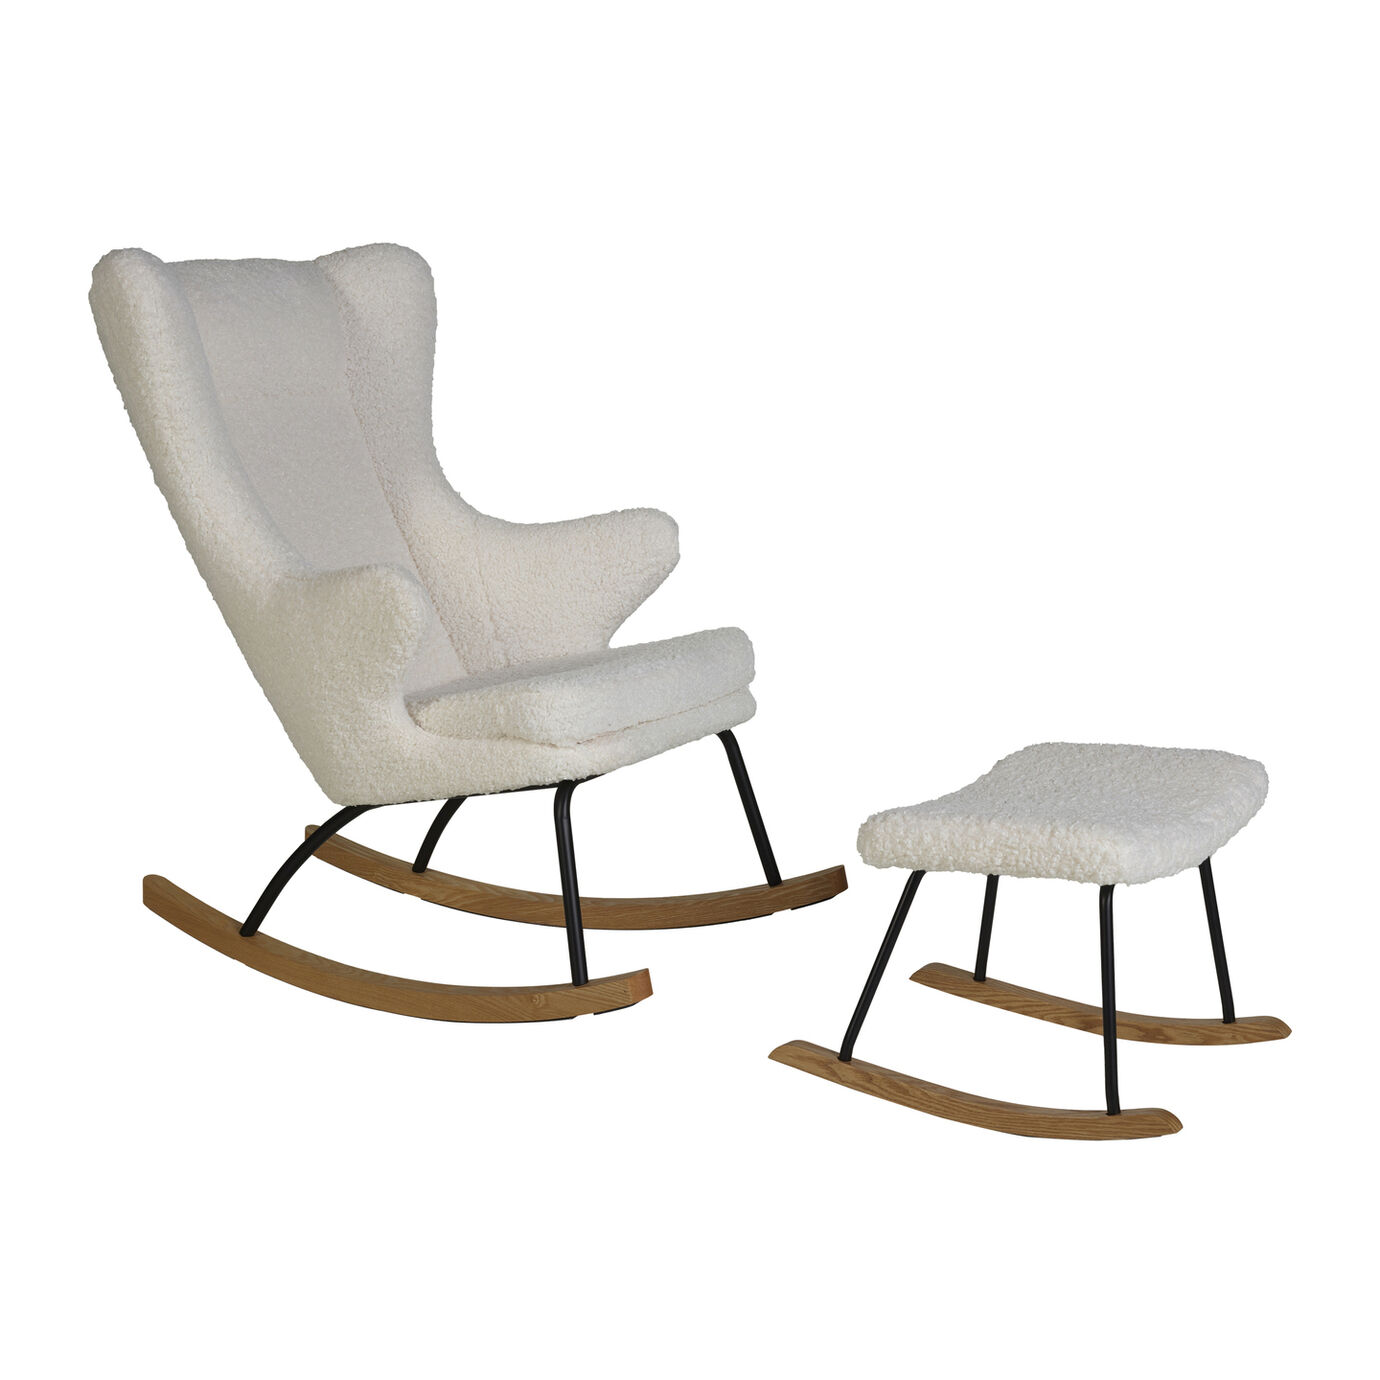 Afbeelding Quax Rocking Adult Chair De Luxe I Limited Edition